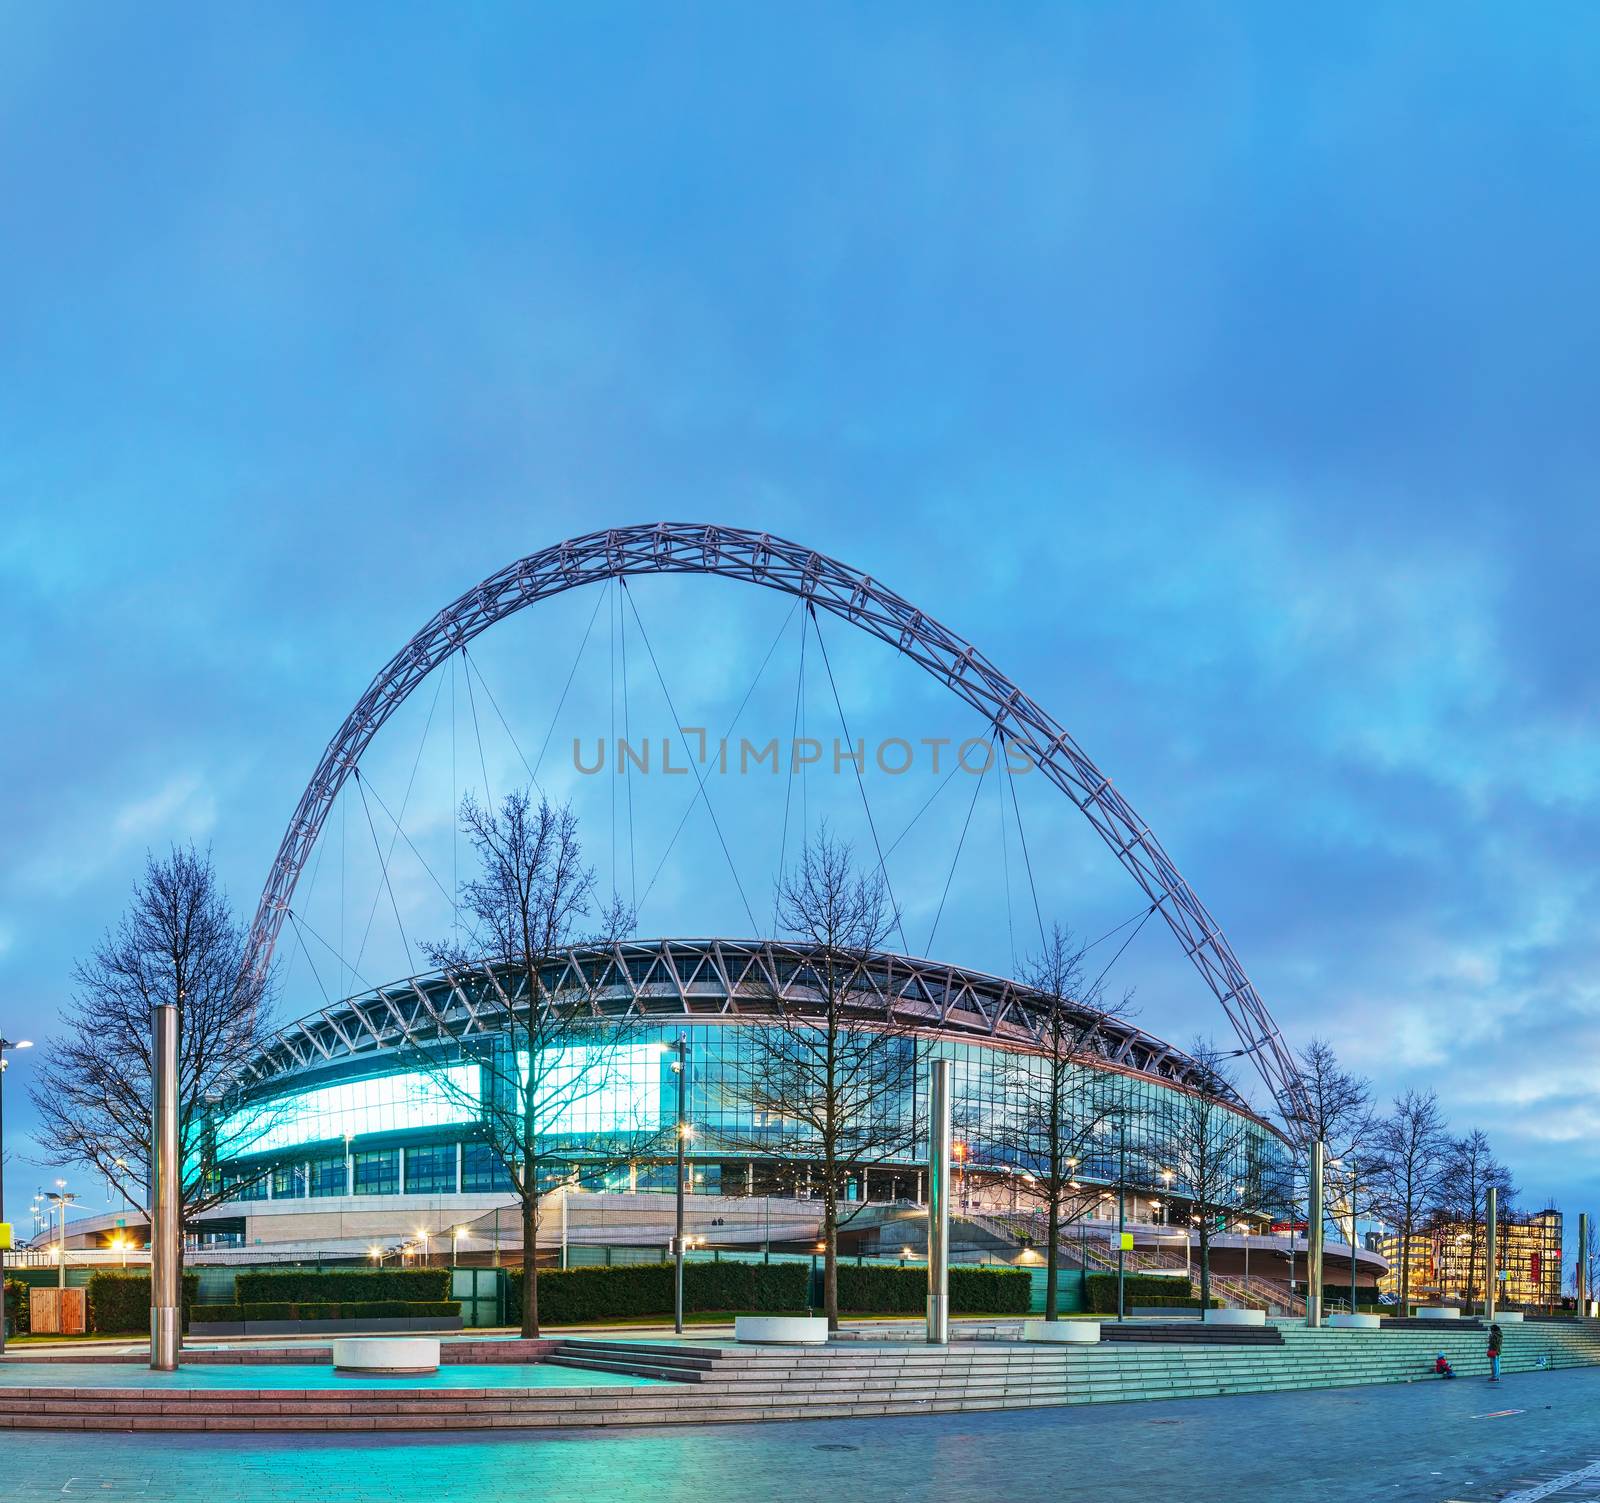 LONDON - APRIL 6: Wembley stadium on April 6, 2015 in London, UK. It's a football stadium in Wembley Park, which opened in 2007 on the site of the original Wembley Stadium which was demolished in 2003